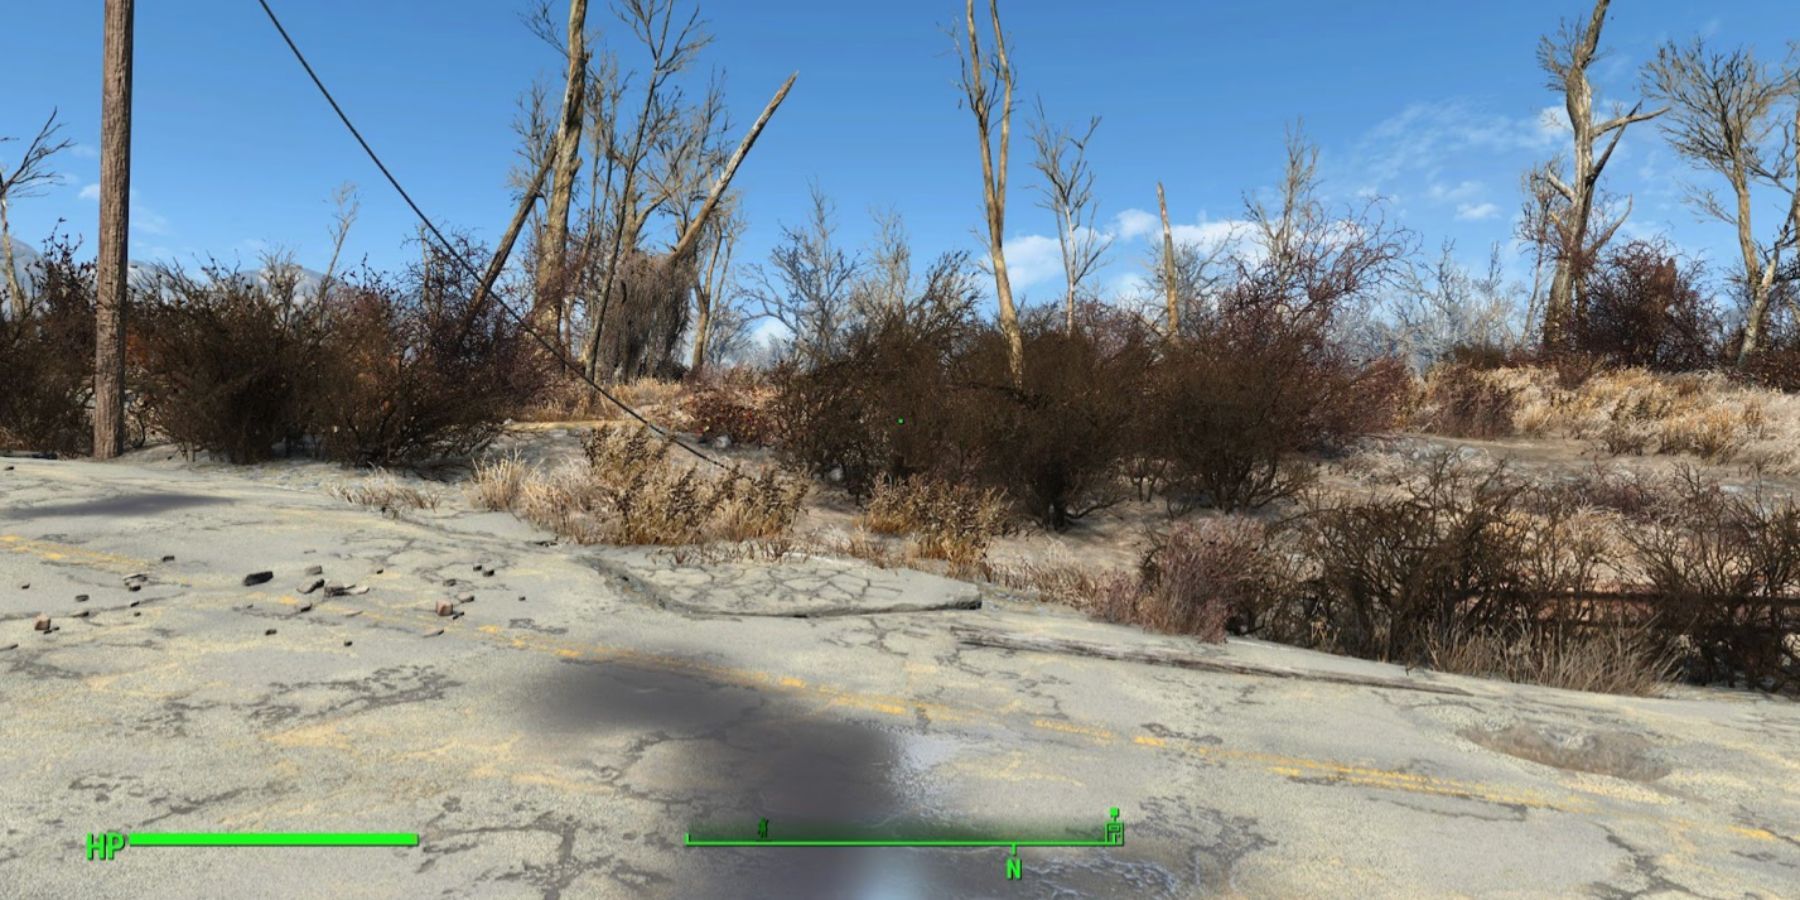 Fallout 4 character with hidden weapon